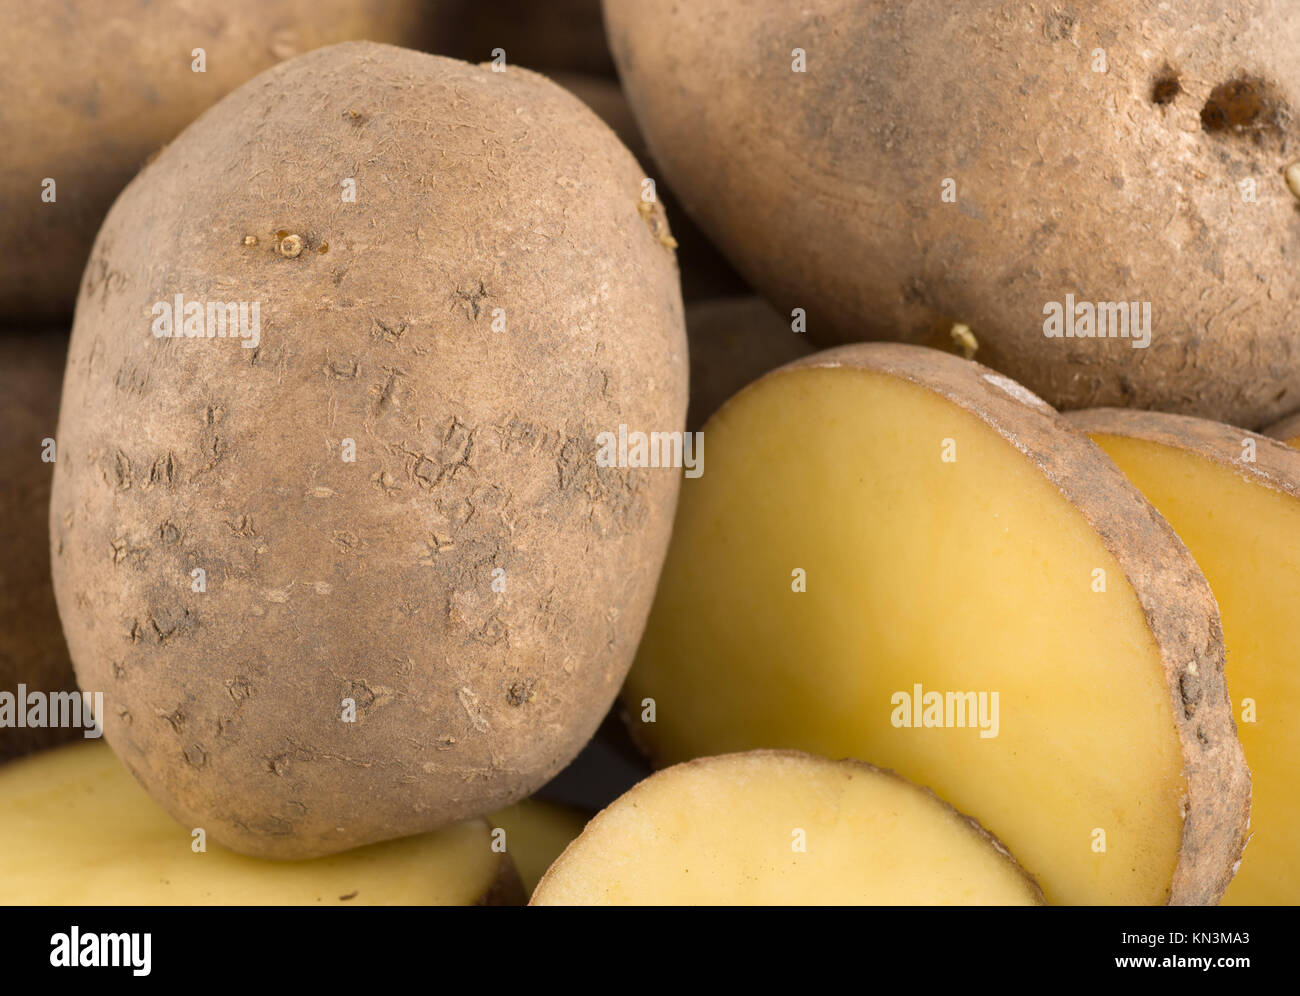 A large group of objects raw potatoes. Stock Photo